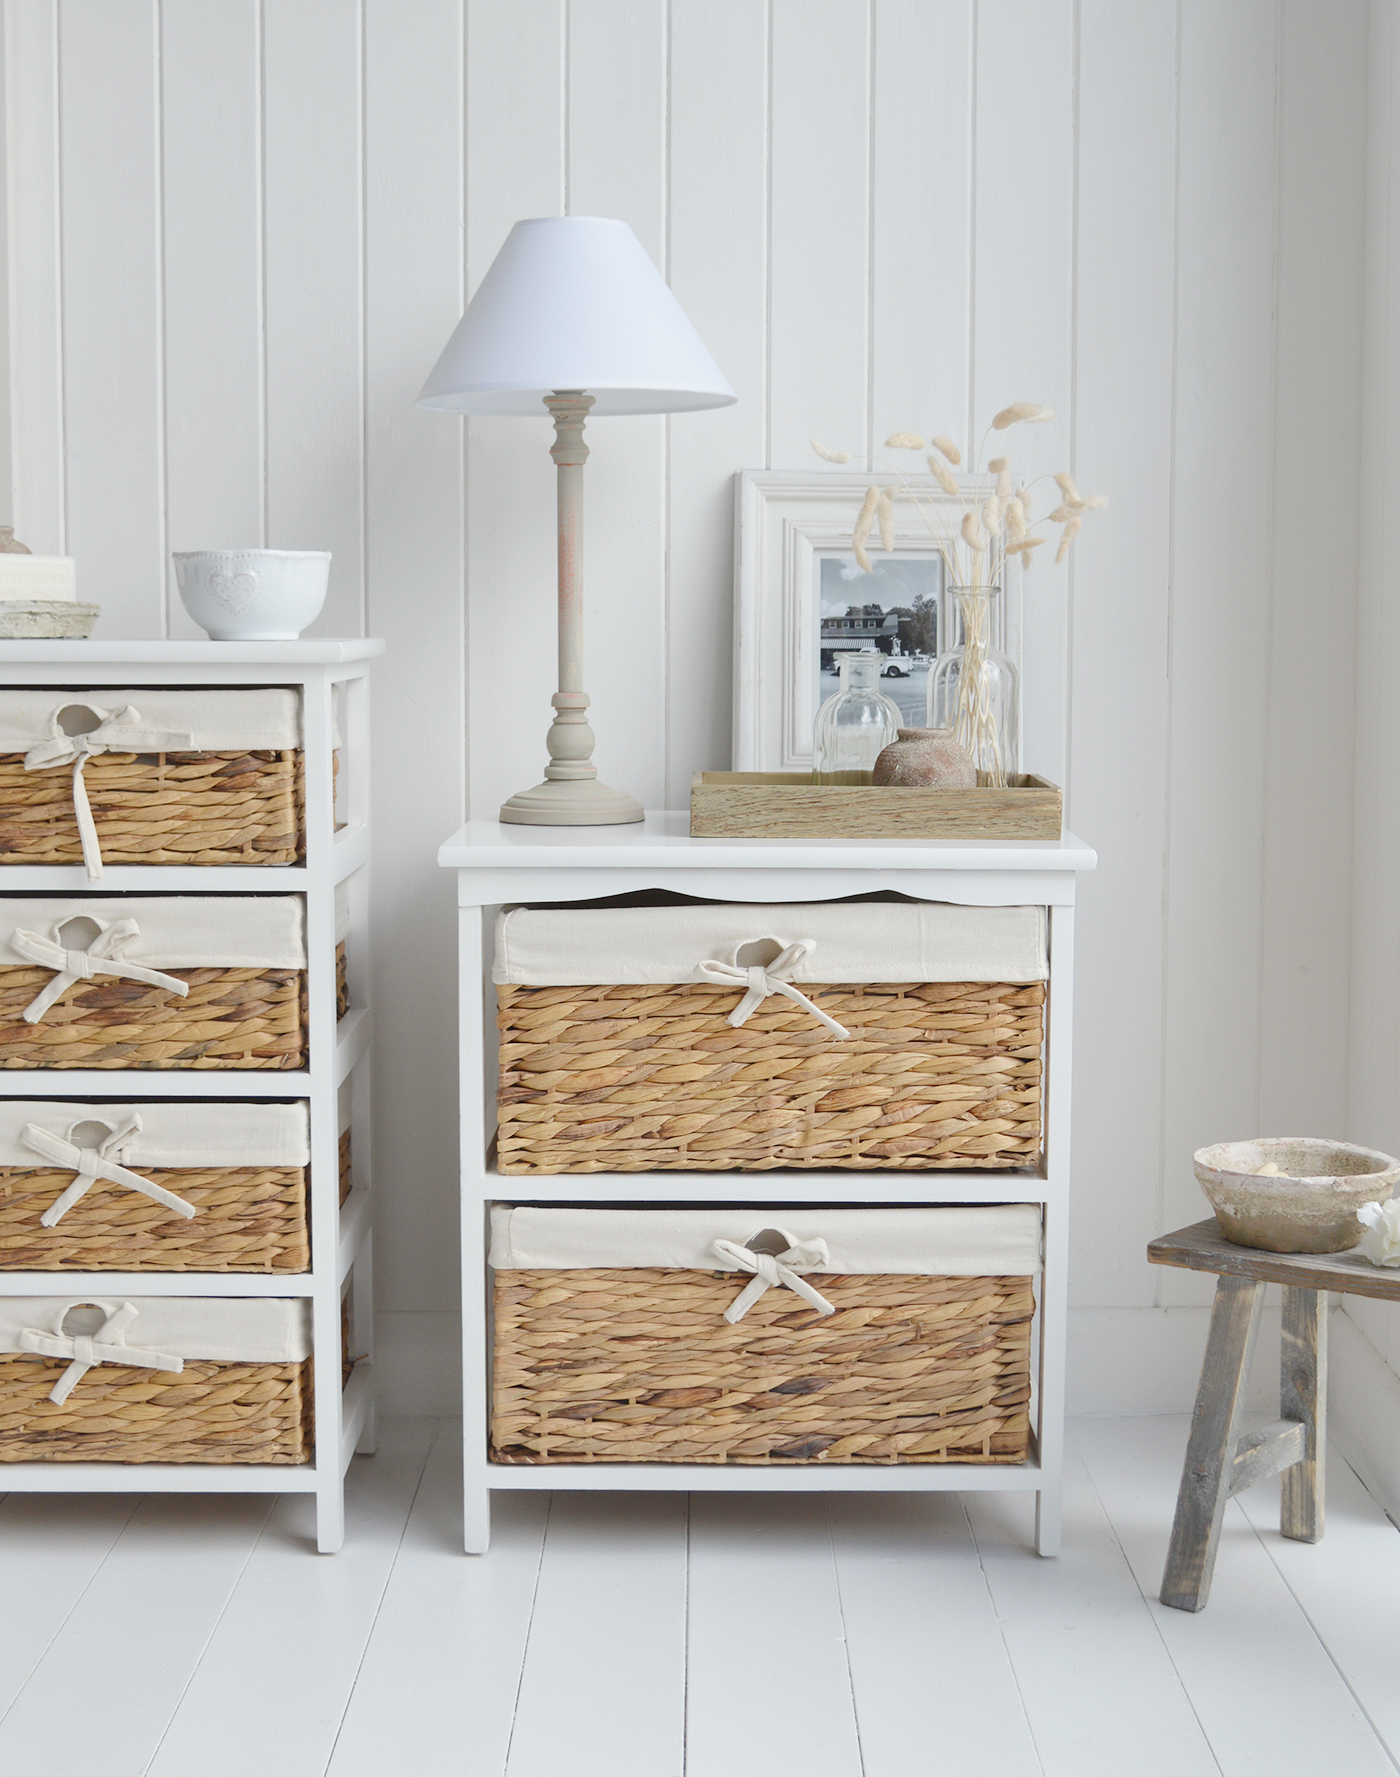 bathroom furniture. A wide white bathroom cabinet with two basket drawers for New England Country, coastal, modern farmhouse furniture and interiors, can be used as a white lamp table from The Bar Harbor range